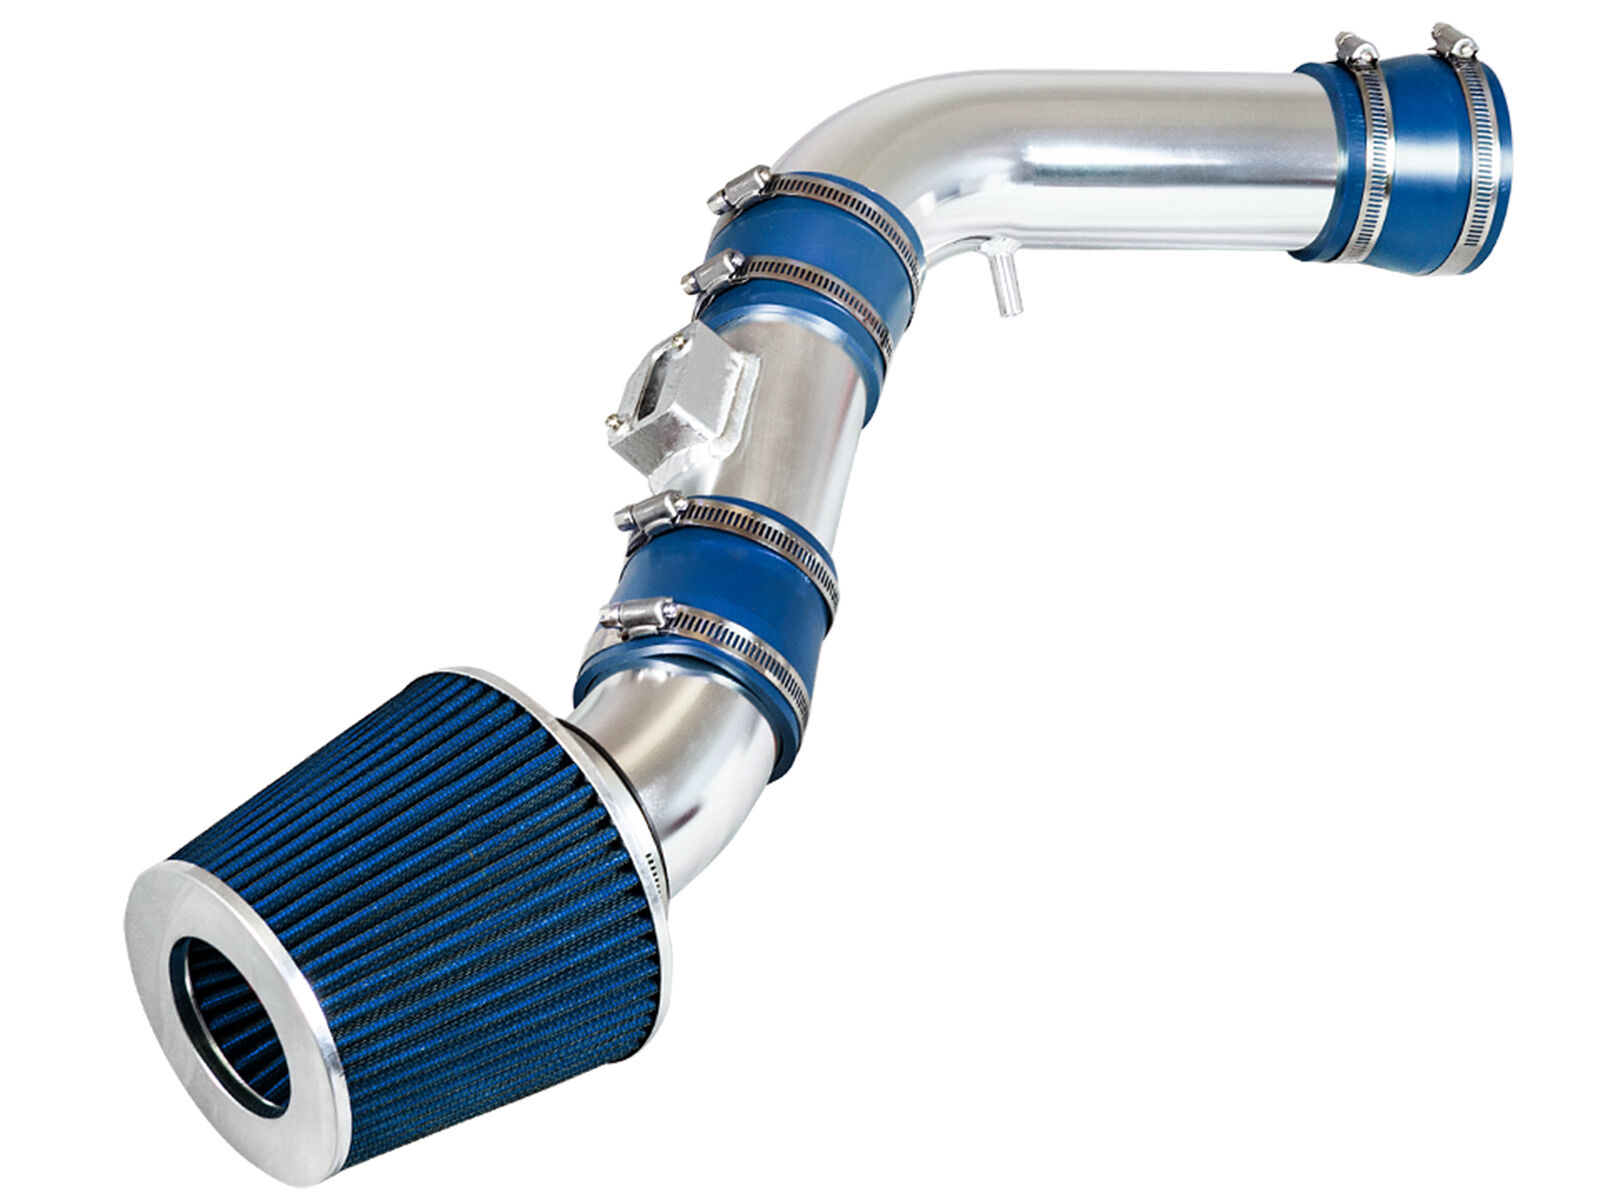 BLUE Cold air intake kit +Filter For 2007-2012 Colorado/Canyon/H3/H3T 3.7L I5